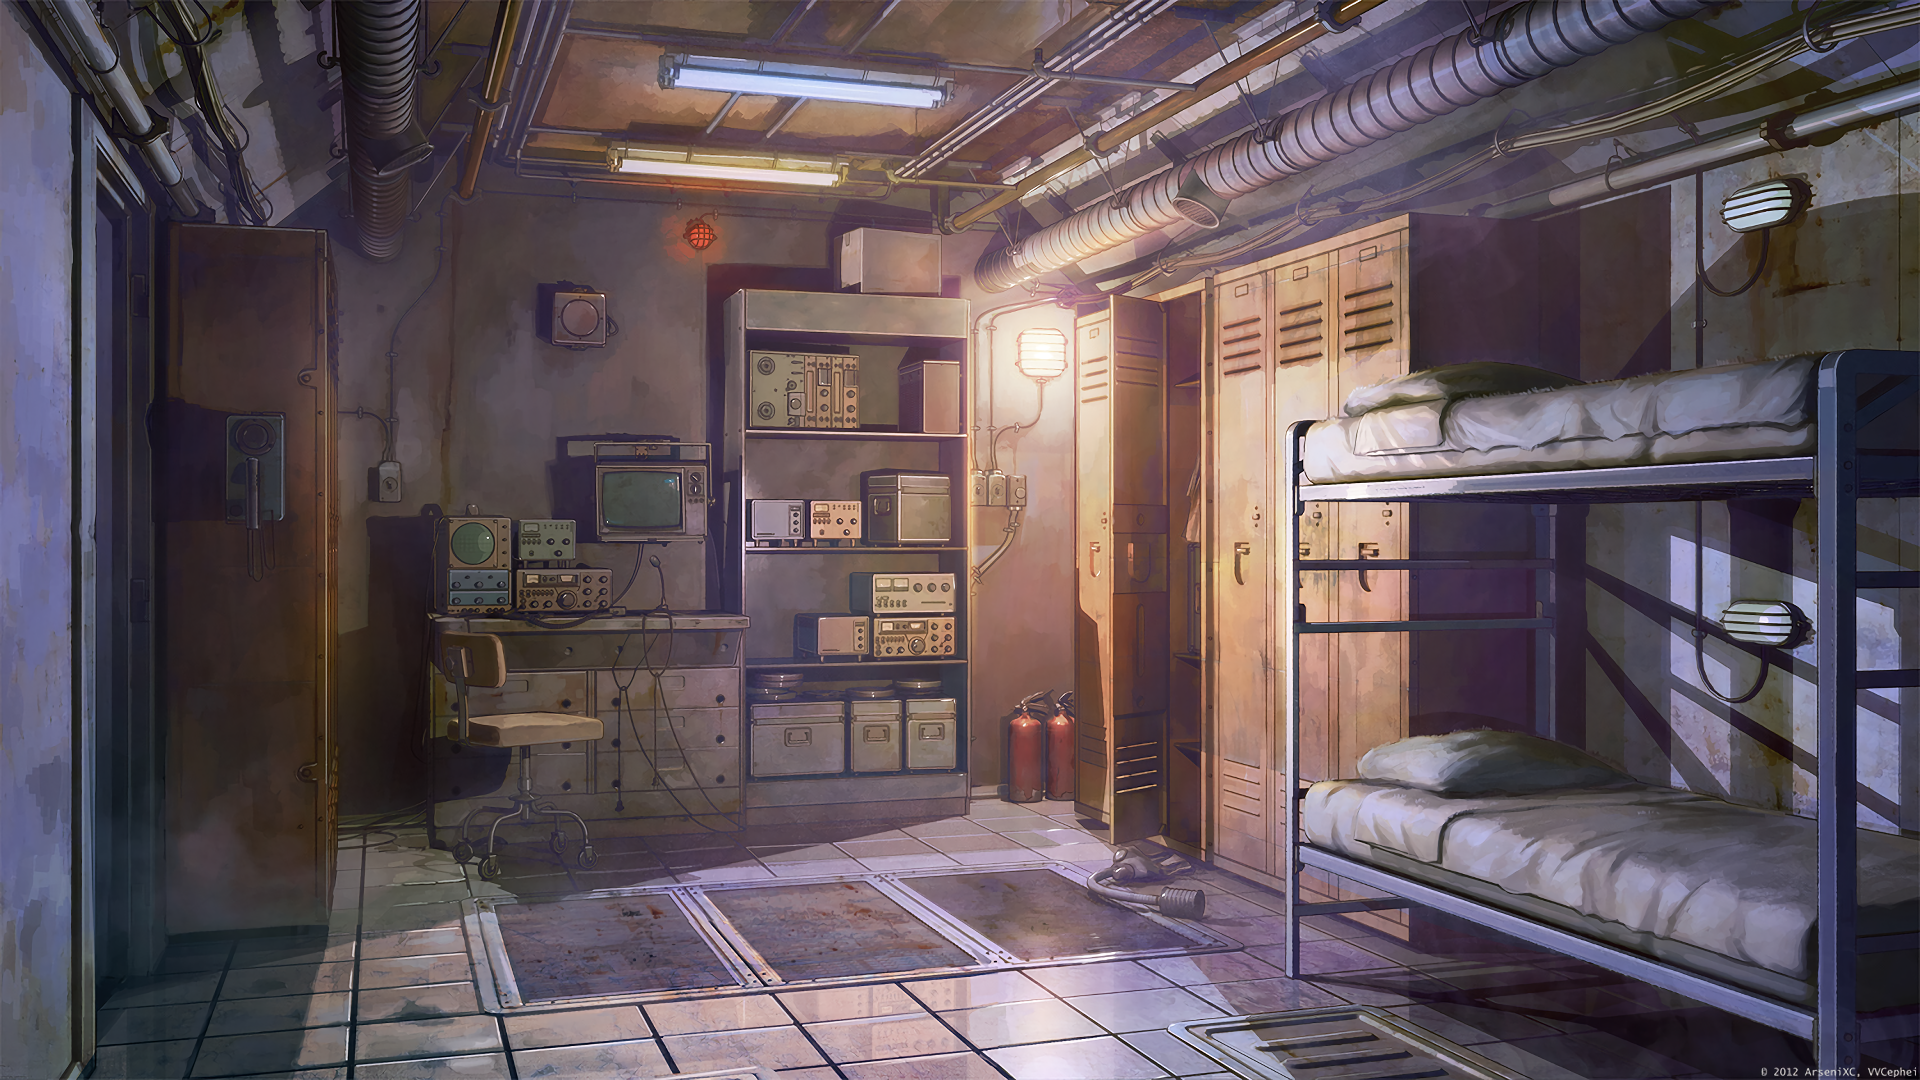 Download 1920x1080 Anime Room, Beds, Old Tech, Lights Wallpaper